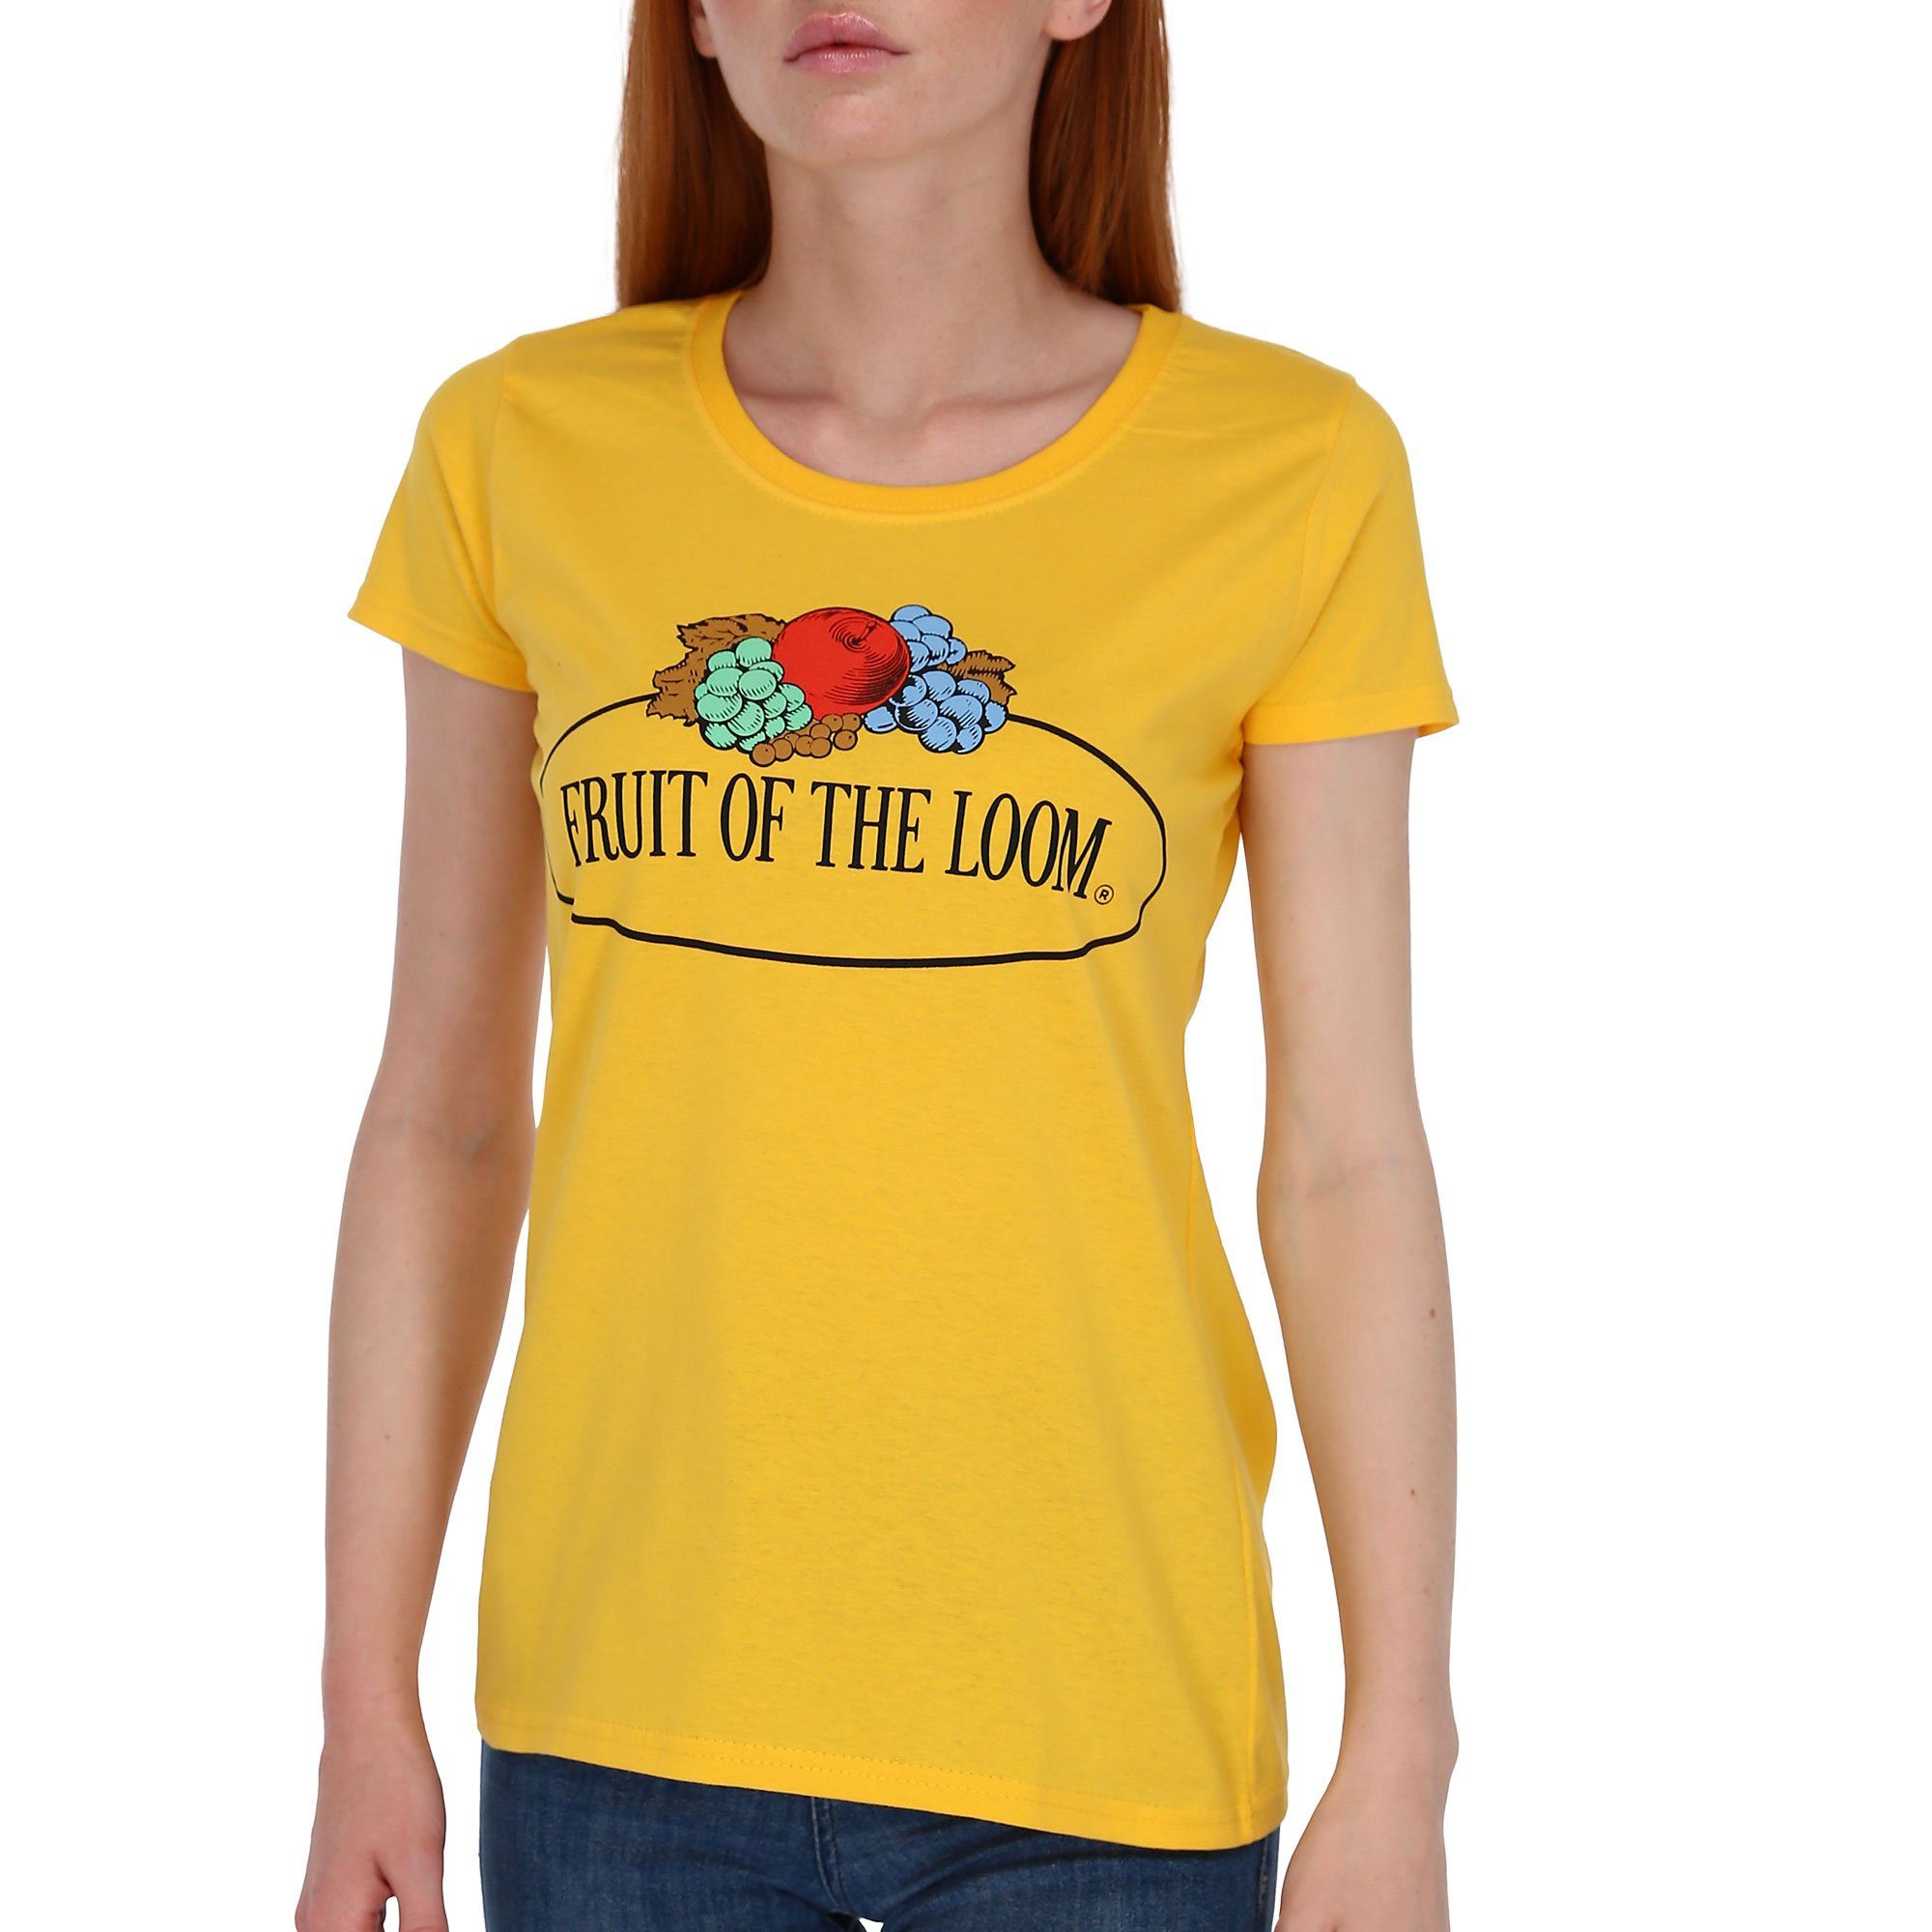 Fruit of the Loom Rundhalsshirt Fruit of the Loom Fruit of the Loom Damen T-Shirt mit Logo sonnenblumengelb